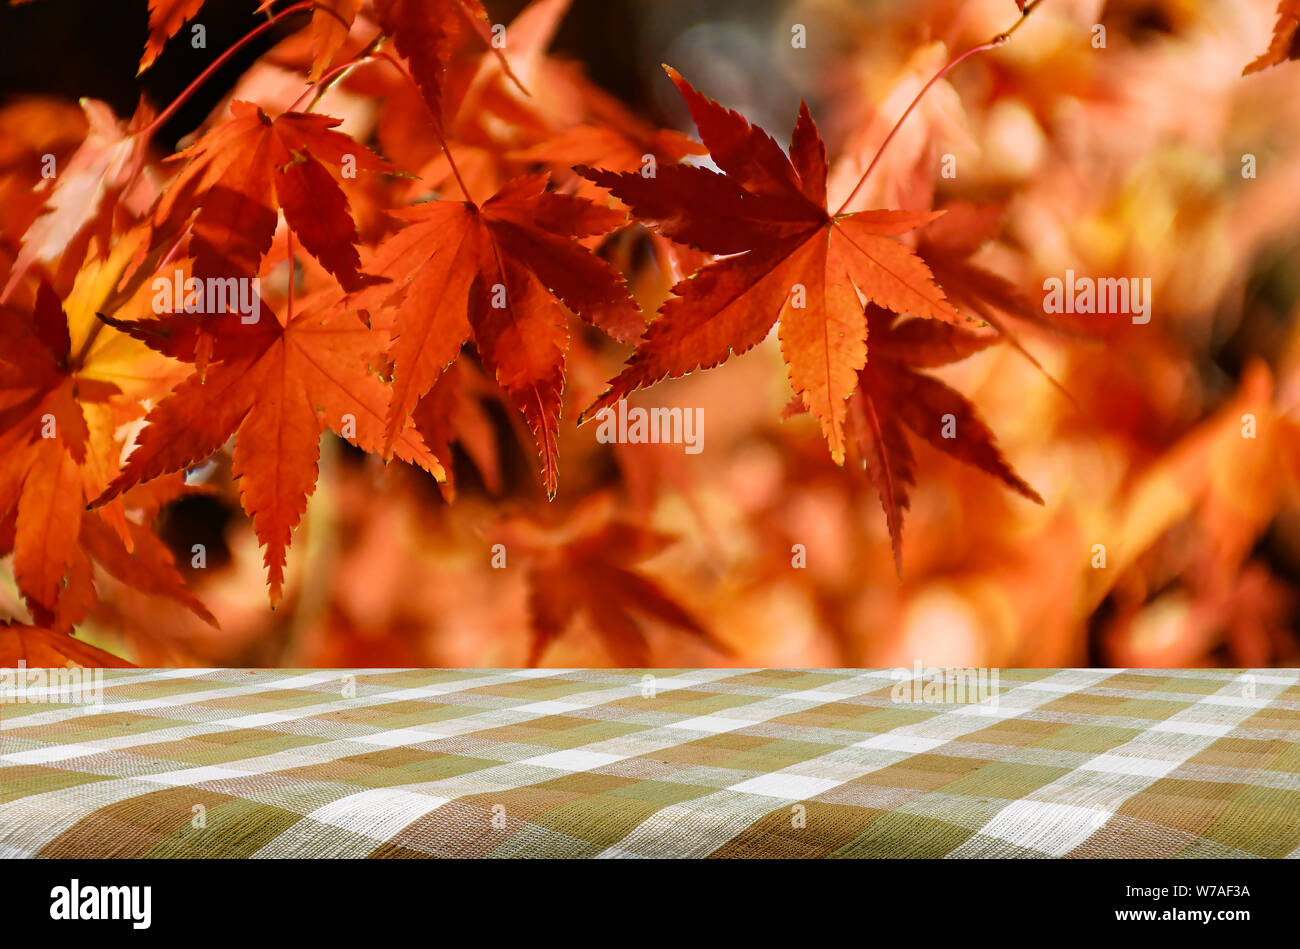 Picnic table with Japanese maple tree garden in autumn. Stock Photo